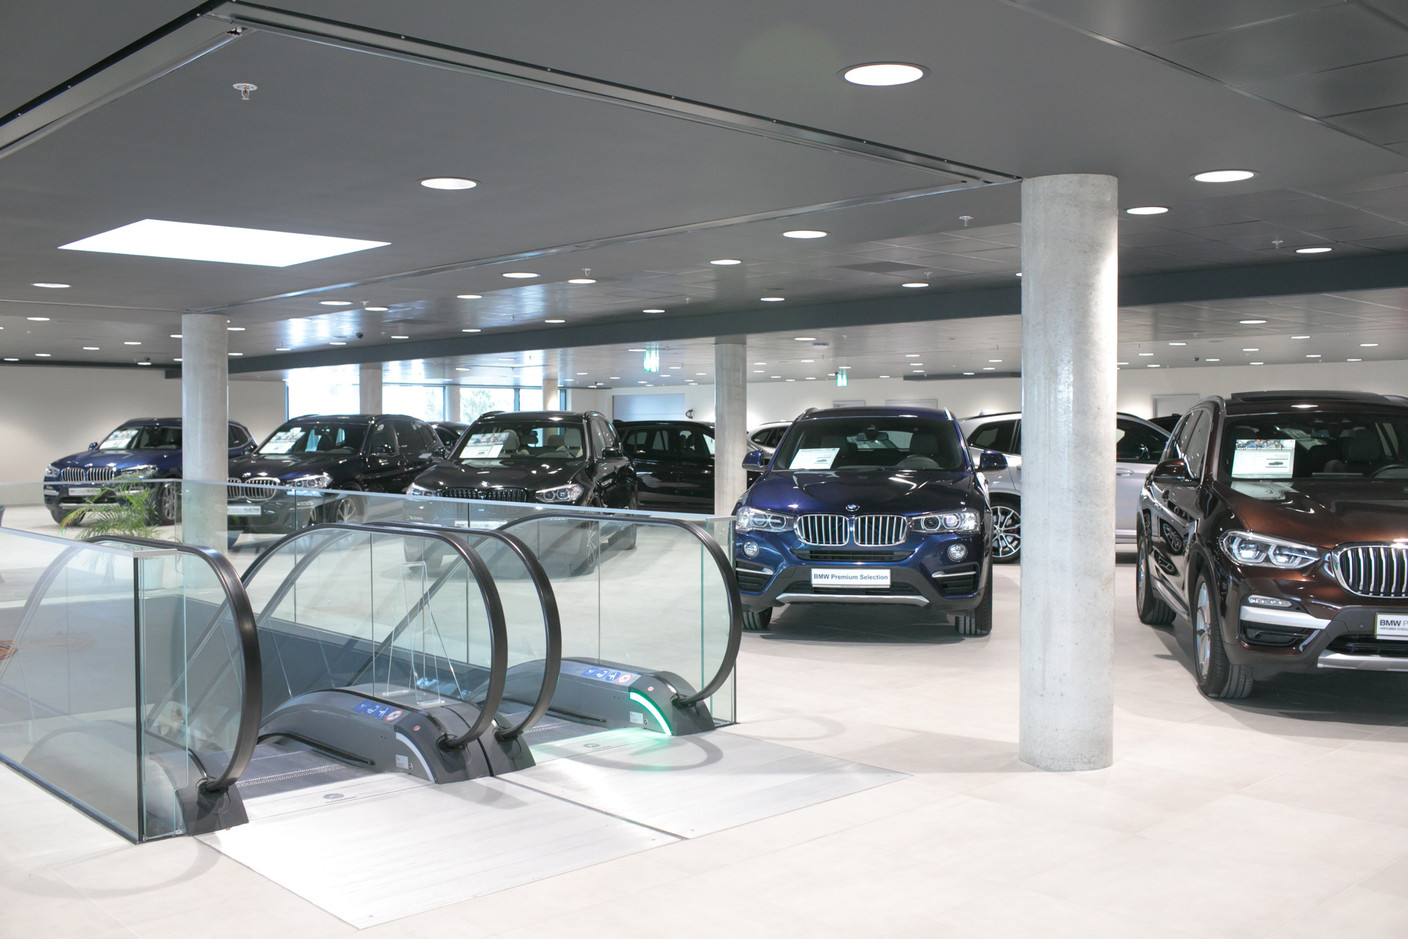 1,300 secondhand cars are sold each year by the Bilia-Emond dealership. Photo: Matic Zorman/Maison Moderne